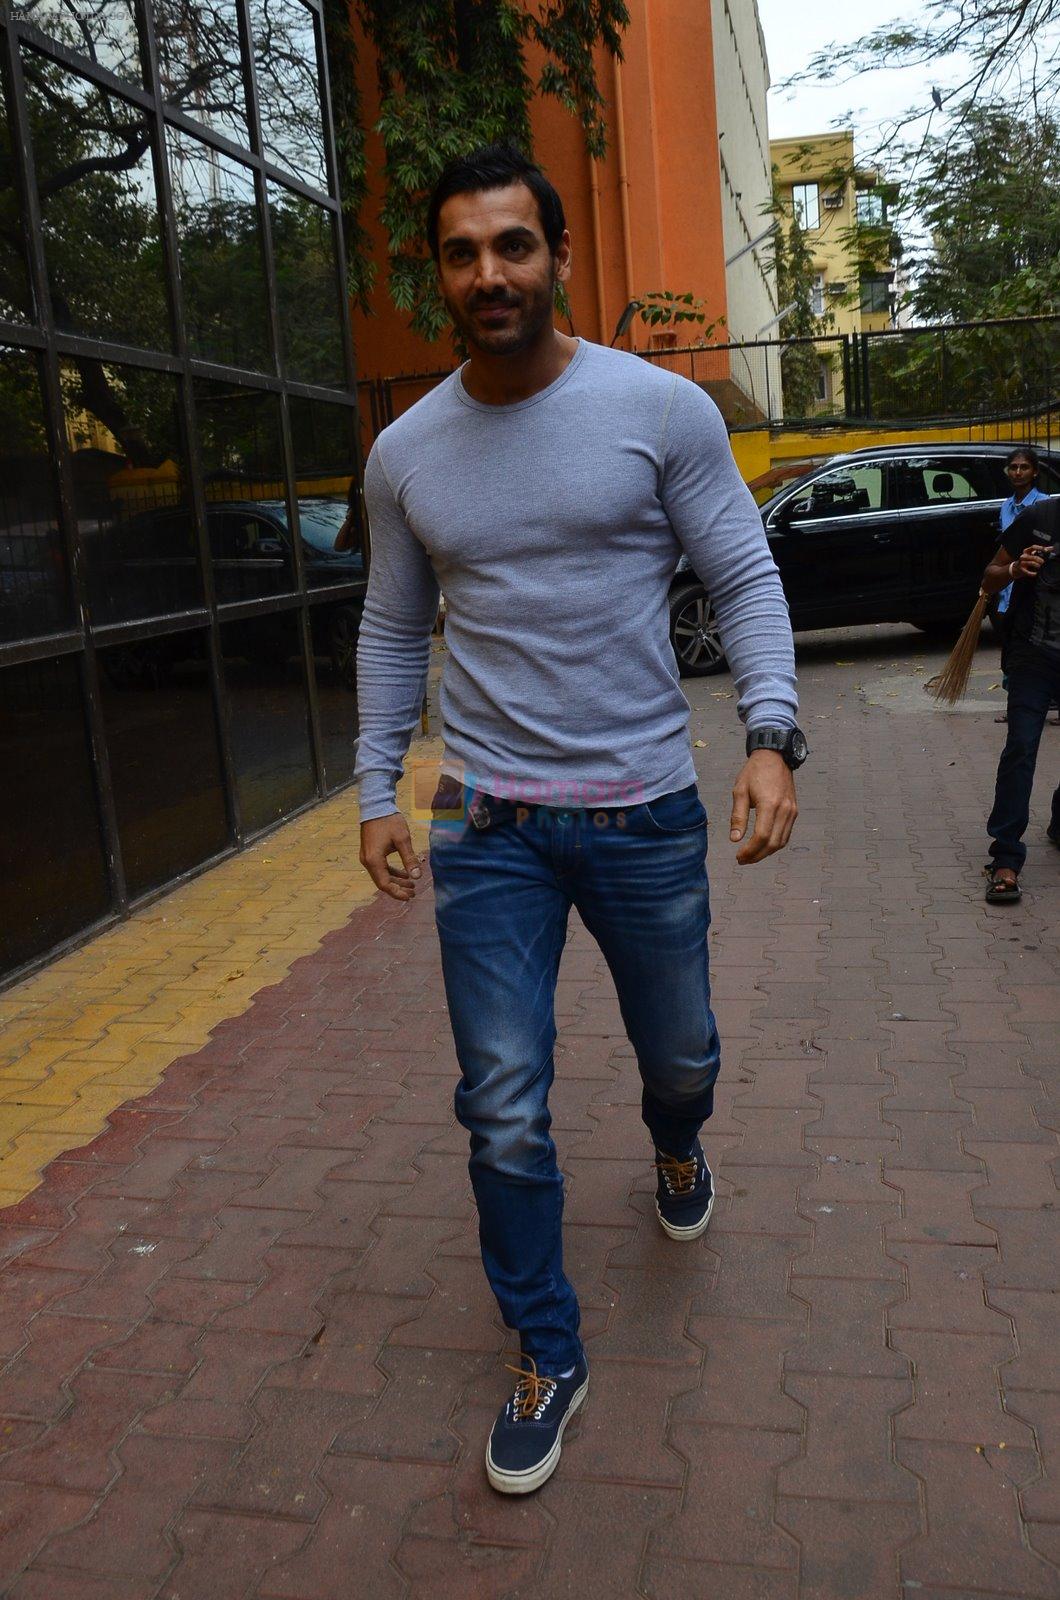 John Abraham at the launch of book In Search of Dignity and Justice by Sudharak Olwe in Mumbai on 22nd Jan 2015